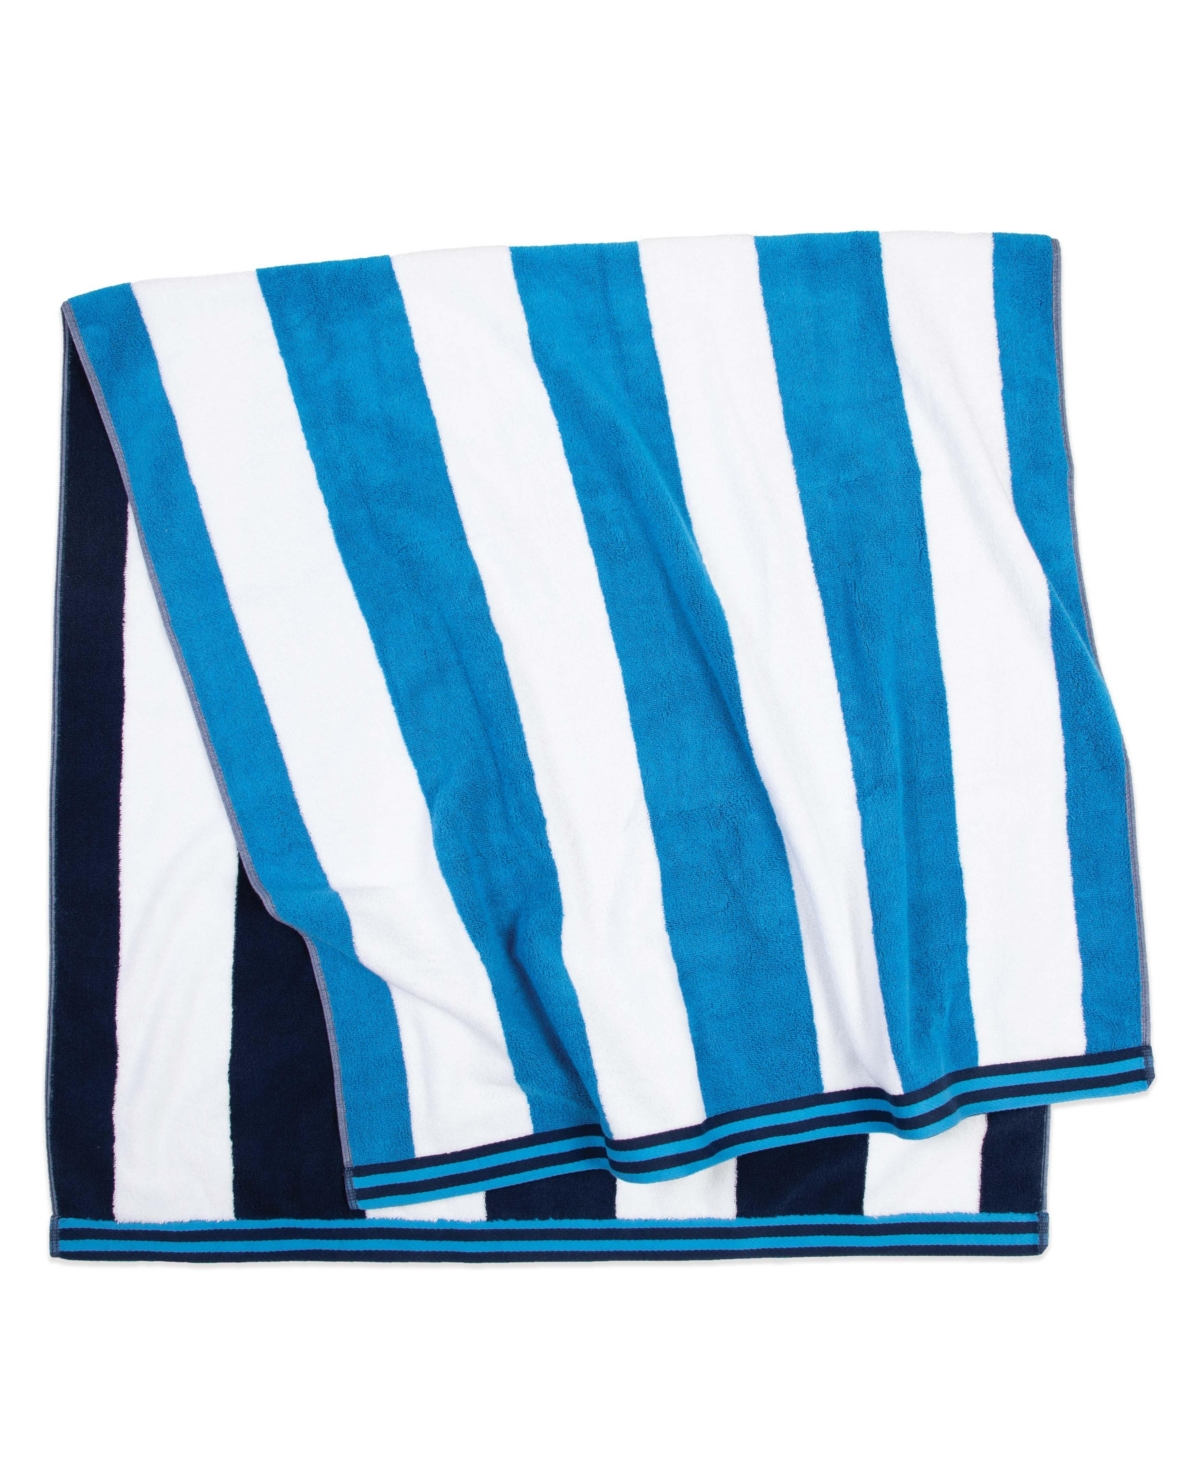 Aston And Arden Reversible Luxury Beach Towel (35x70 In., 600 Gsm), Striped Color Options, Oversized, Thick, Soft Ri In Navy/blue